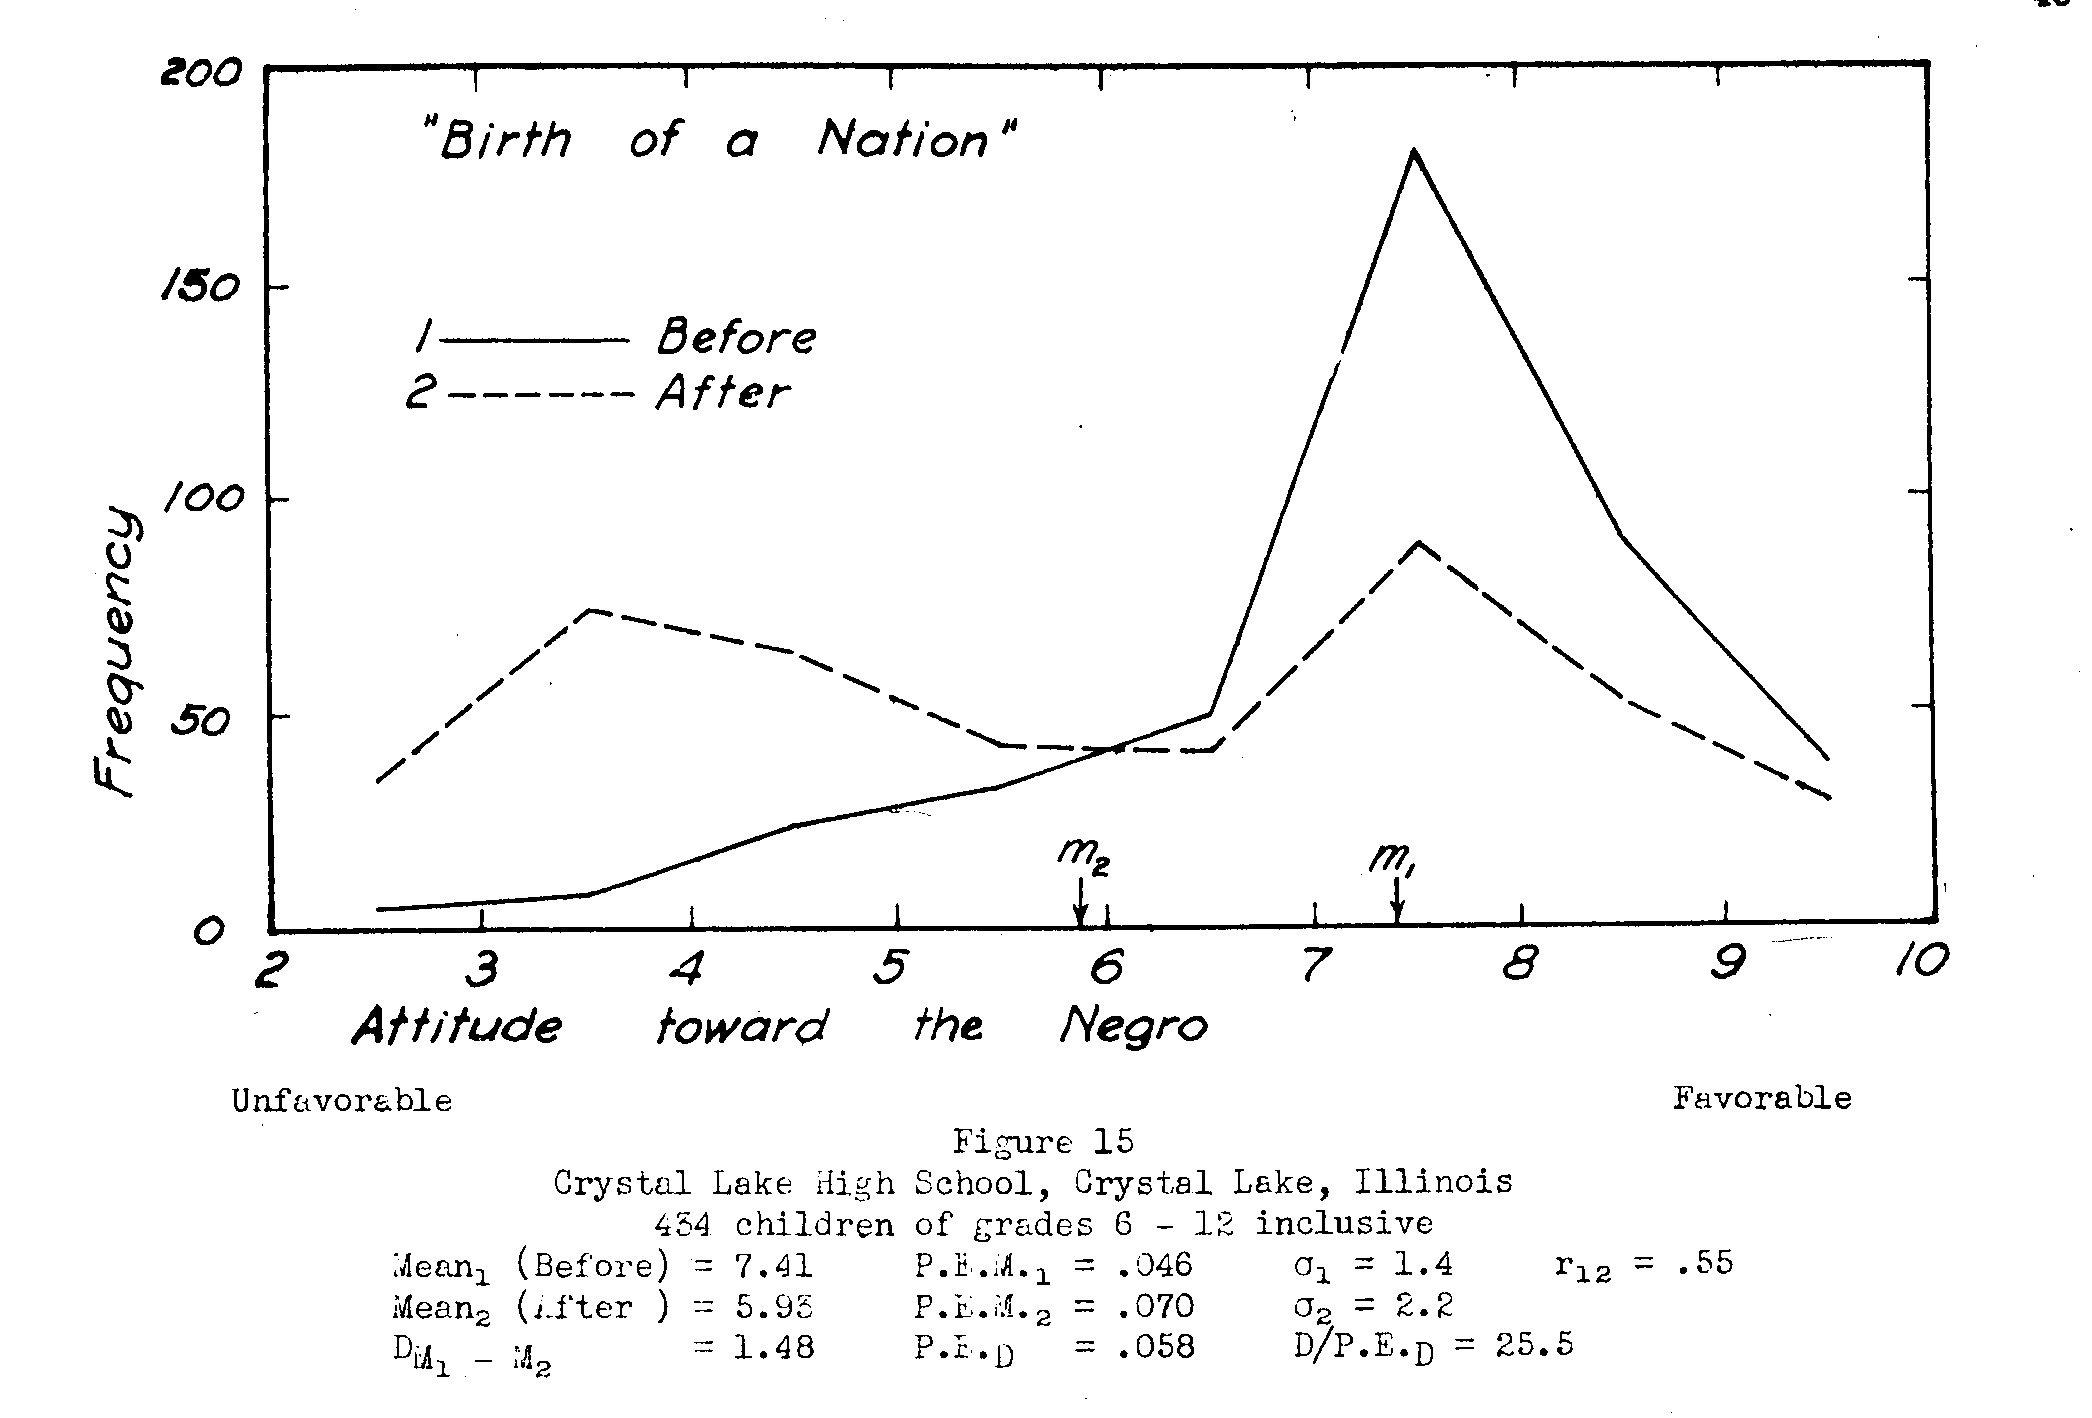 Figure 16, Attitude toward Negros, before and after BIRTH OF A NATION